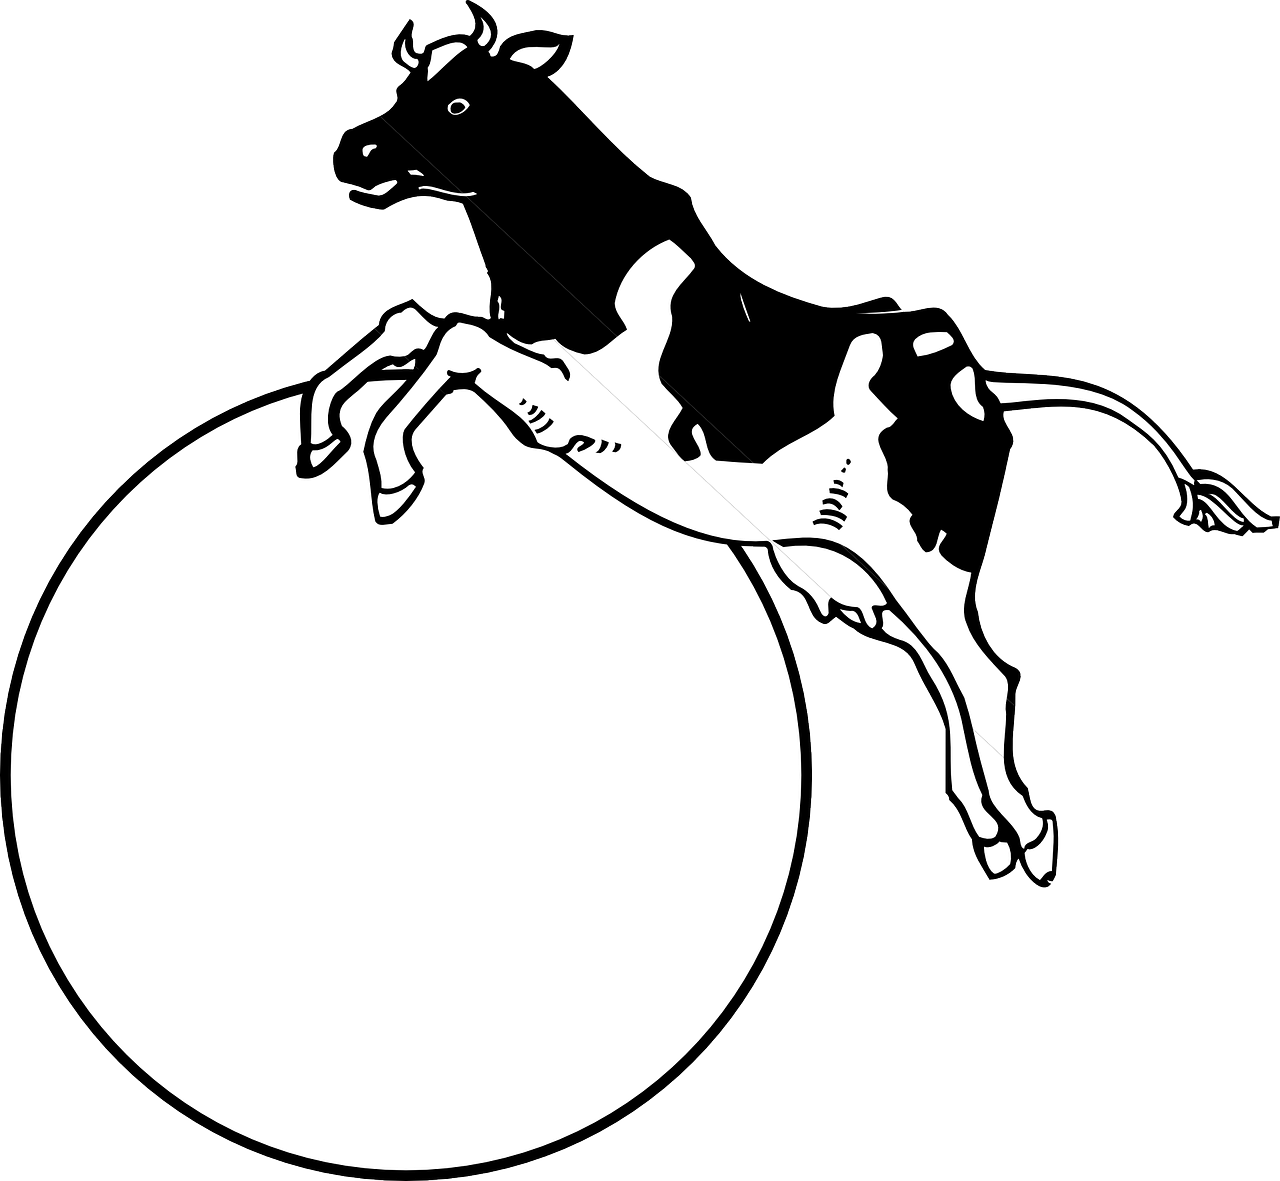 moon cow jumping free photo